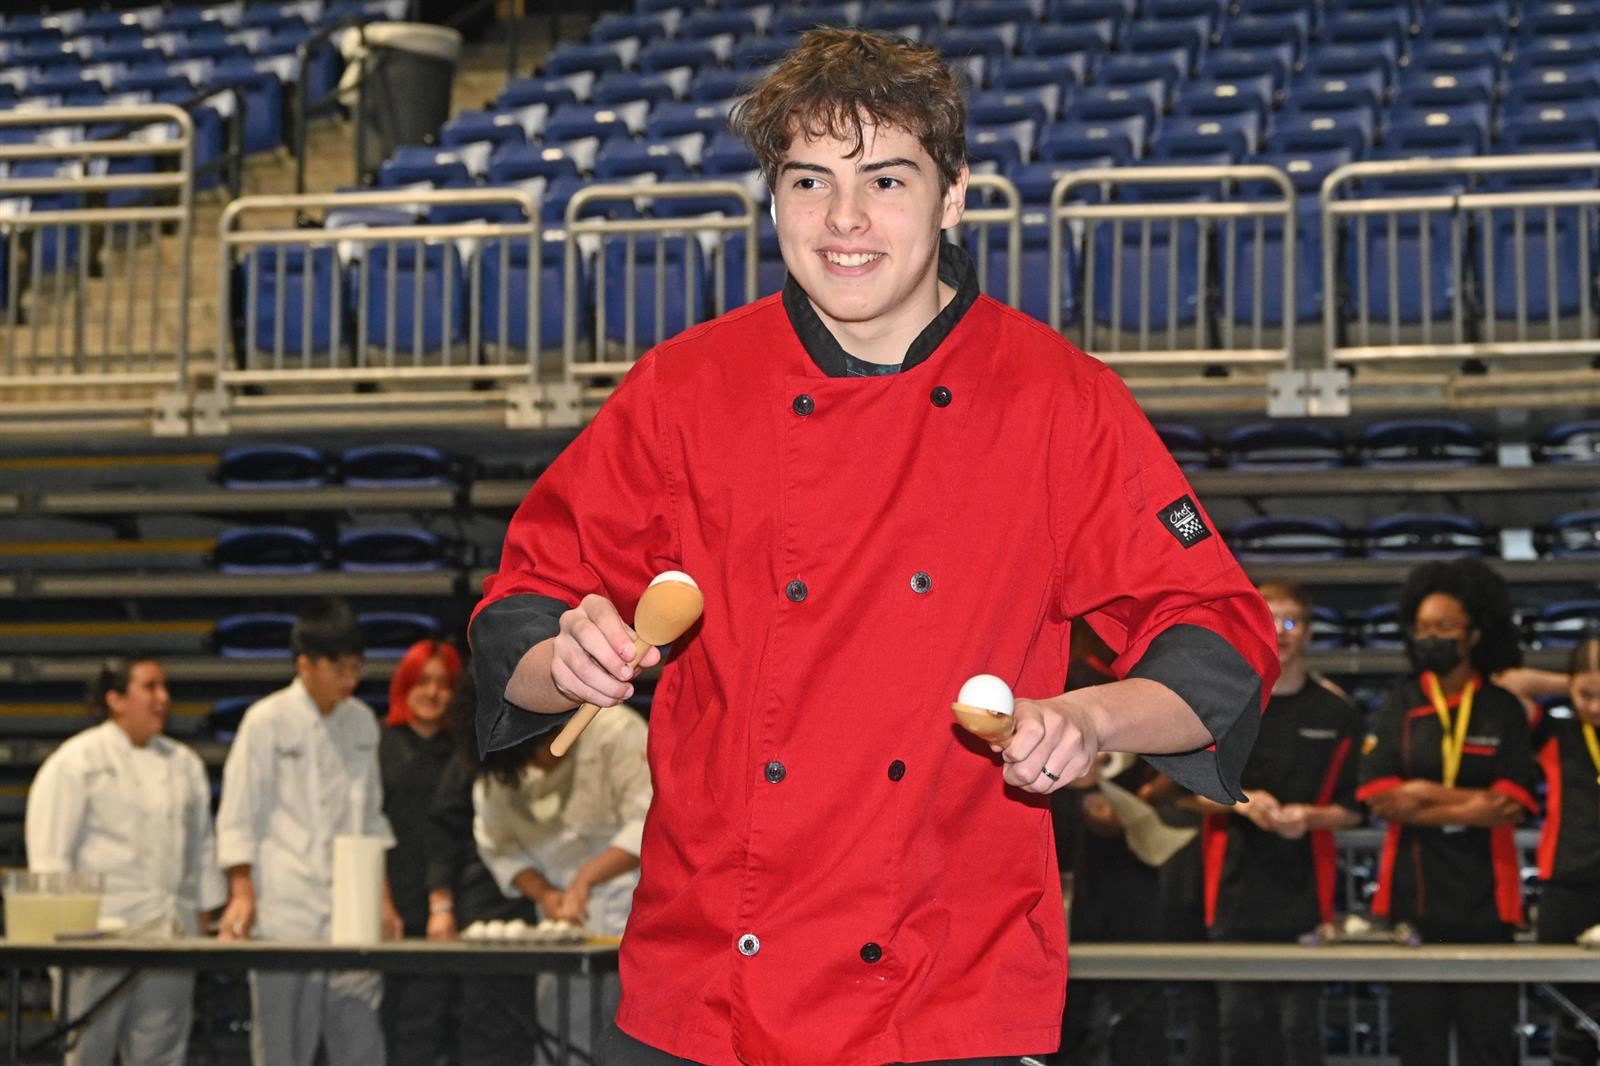 Students participated in a meringue challenge, a relay-style race that featured participants carrying eggs in spoons.